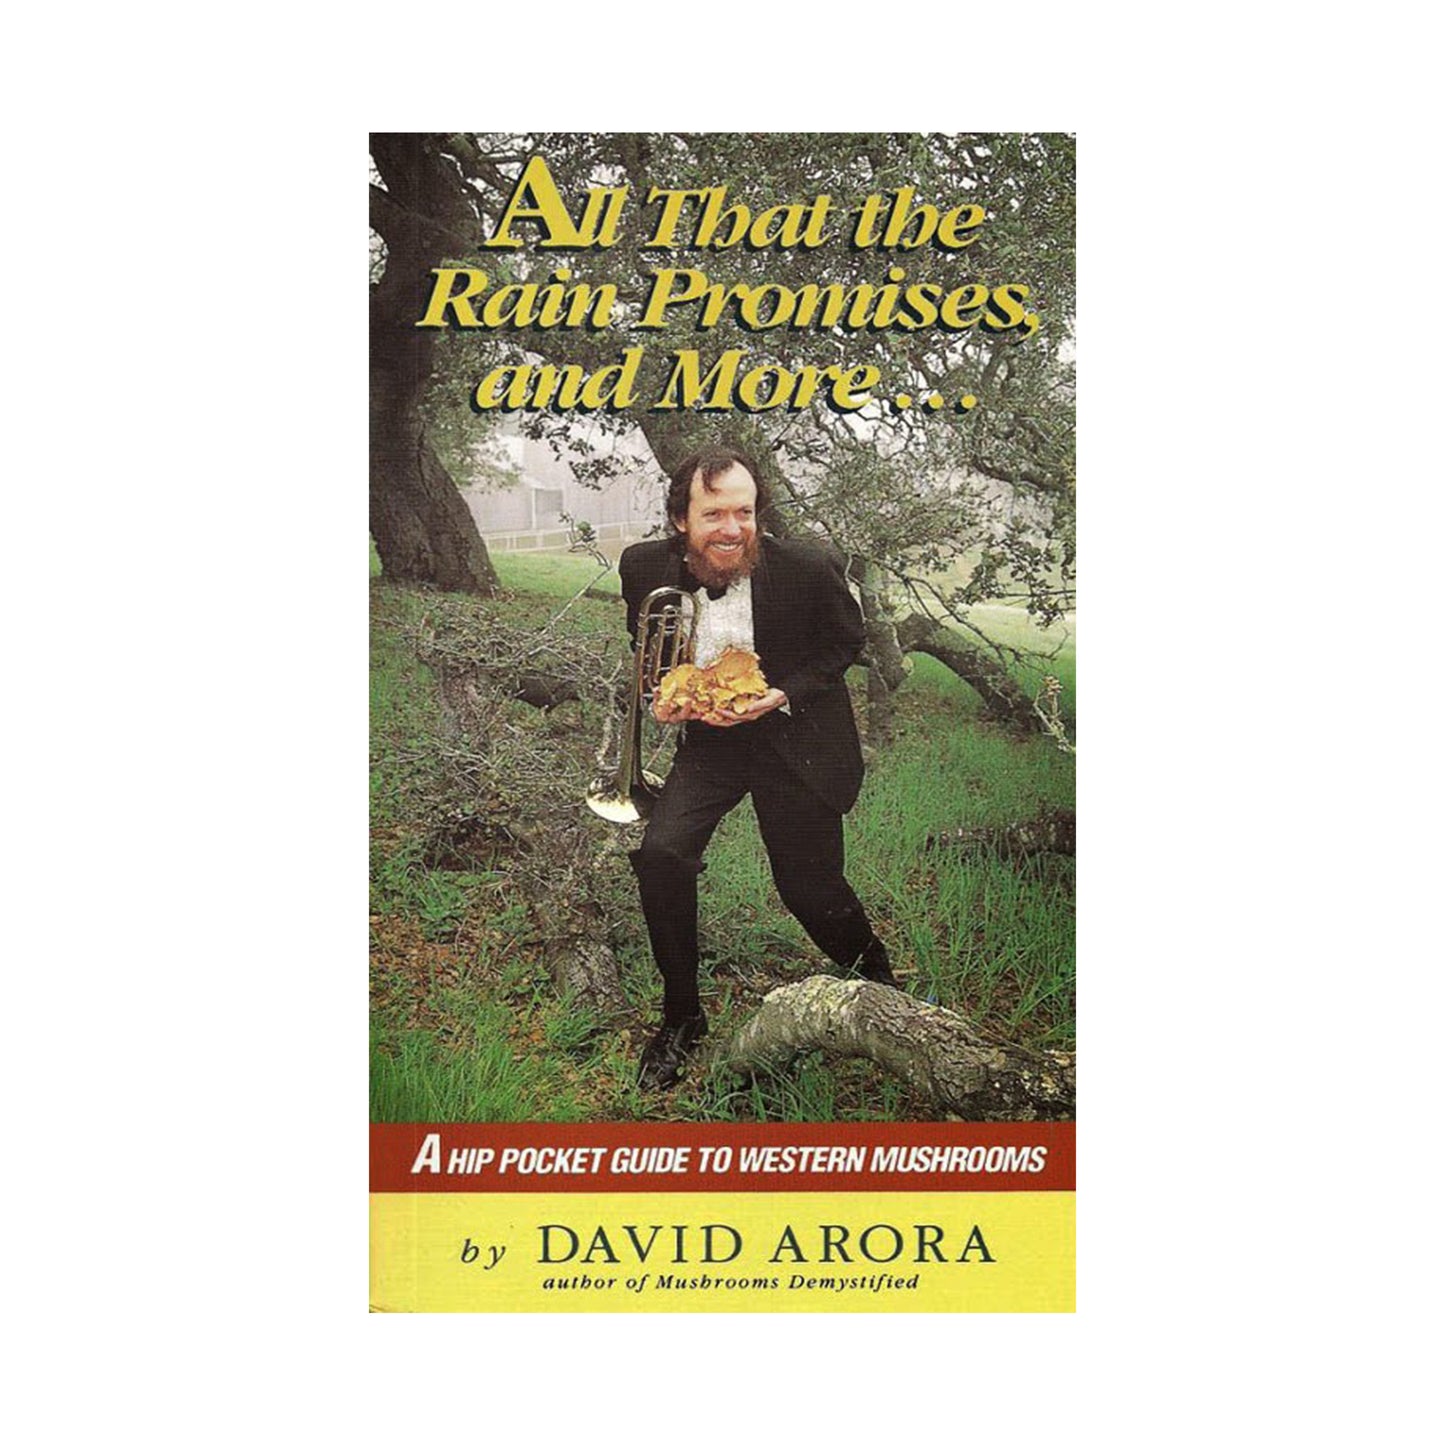 All That the Rain Promises and More by David Arora